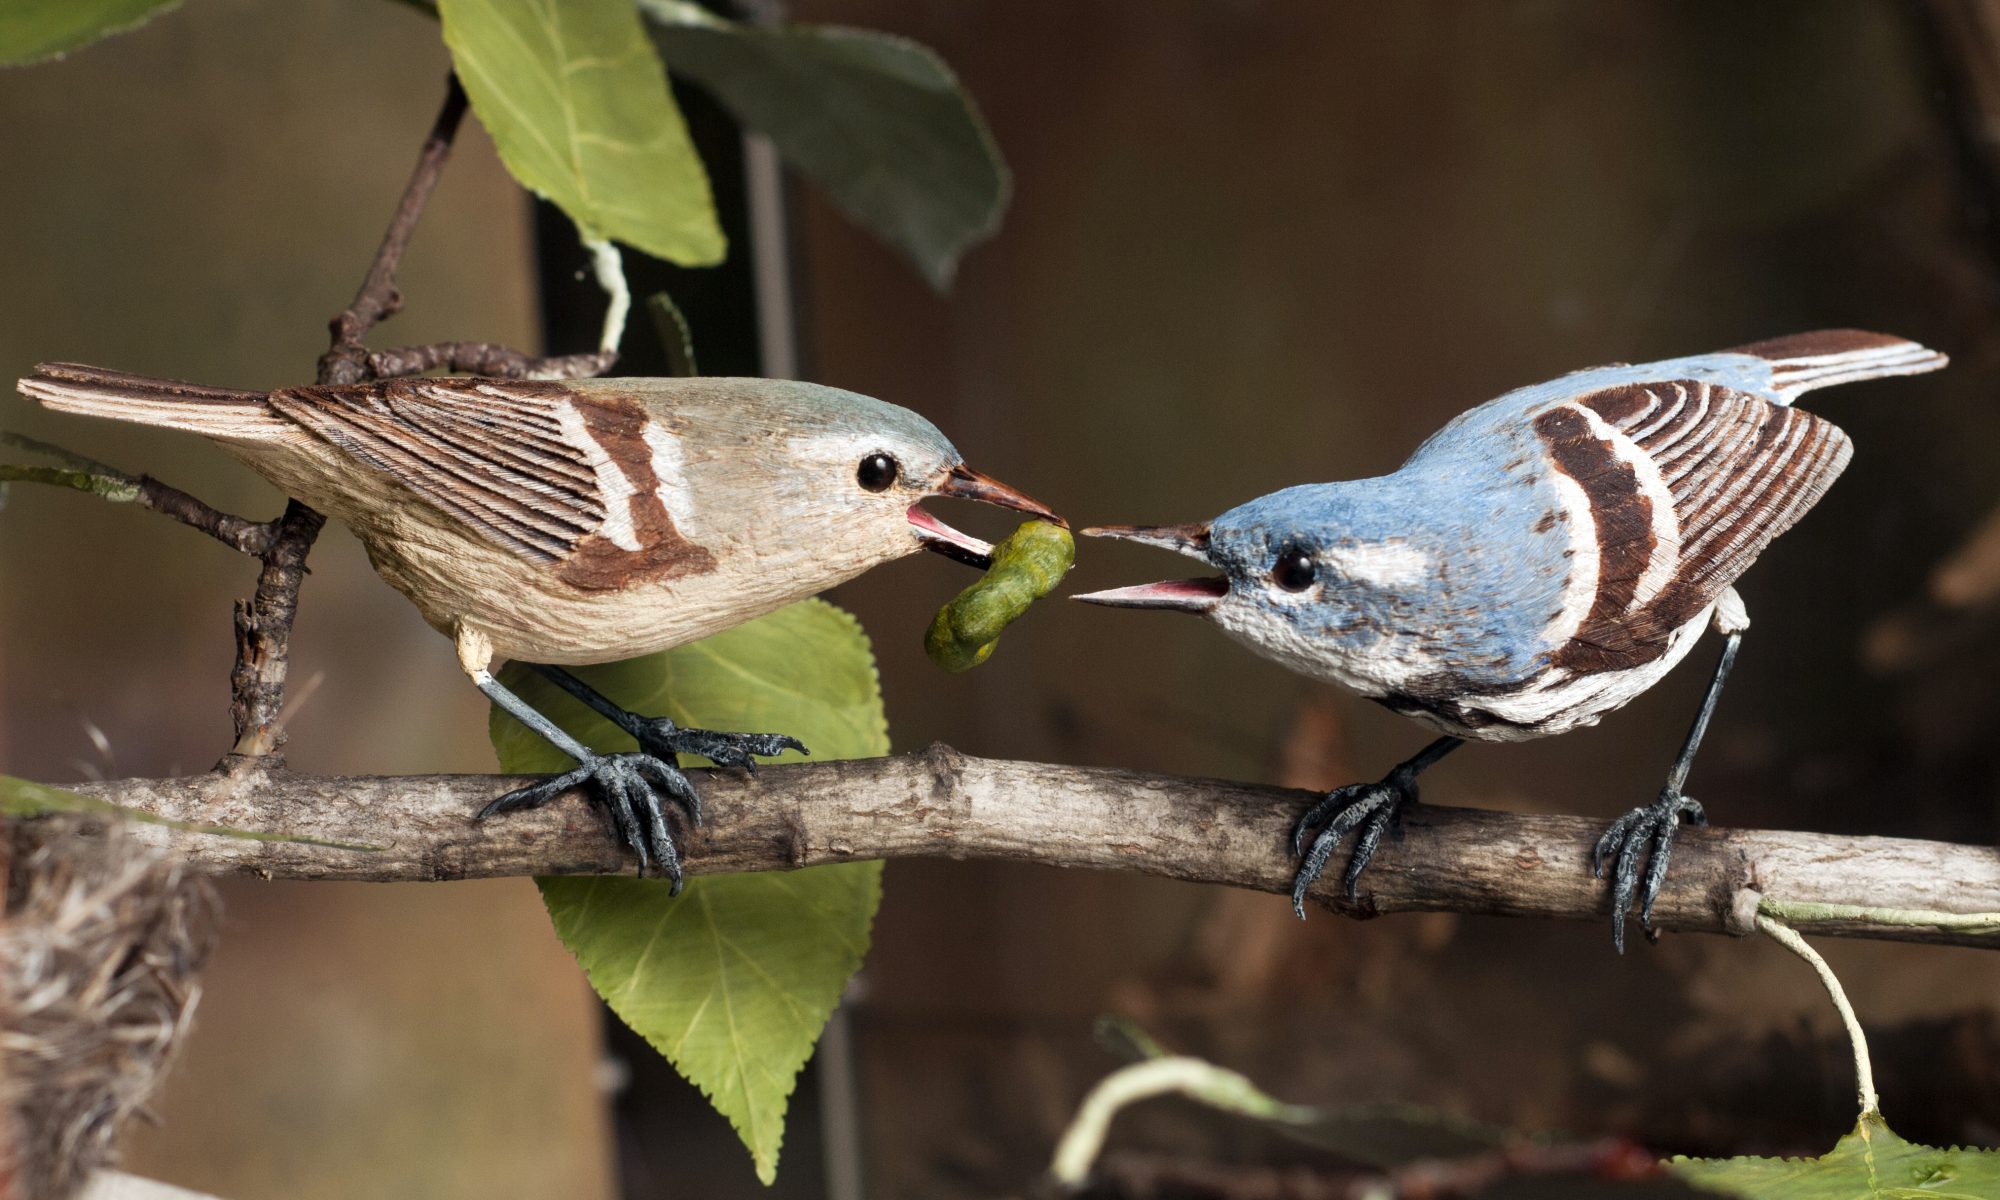 Cerulean Warblers carved by Bob Spear at the Birds of Vermont Museum, Huntington, Vermont. Photograph copyright Caleb Kenna and used by permission.